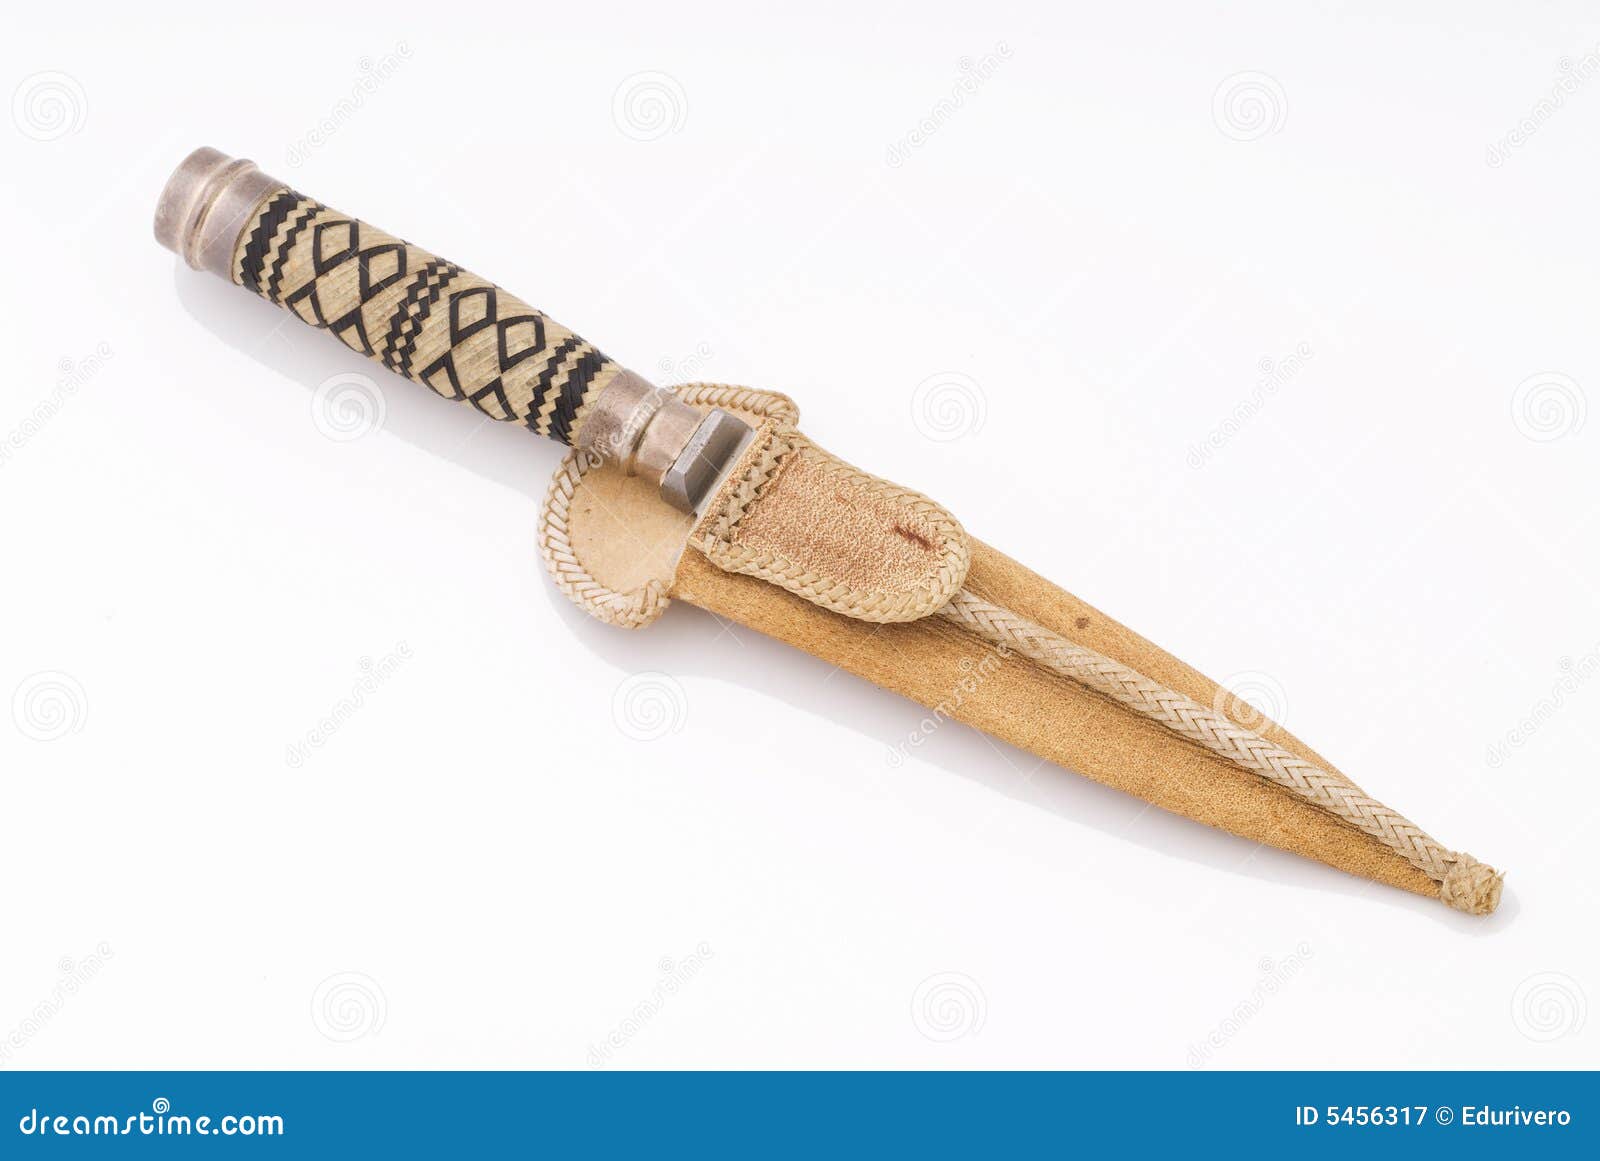 traditional argentinian gaucho knive